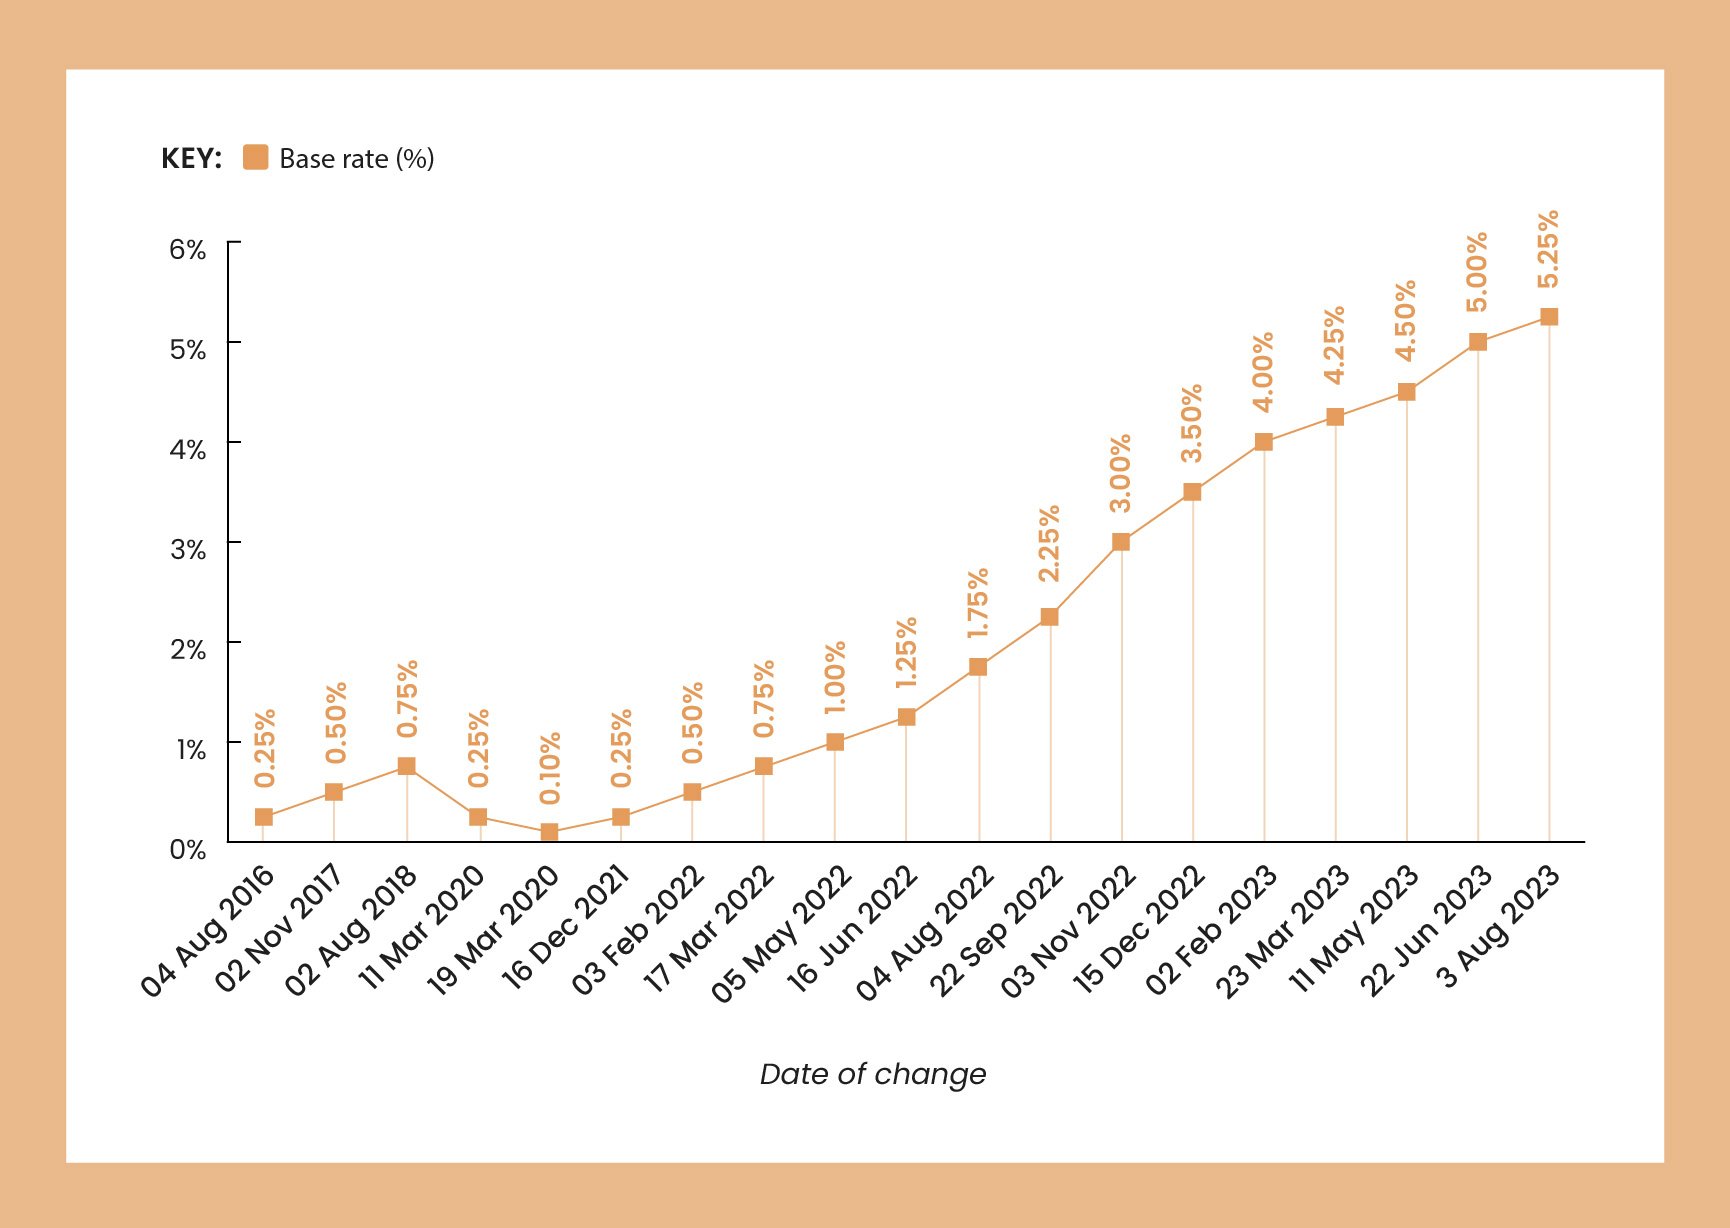 A light orange line graph showing the change in the UK base rate from August 2016 to August 2023